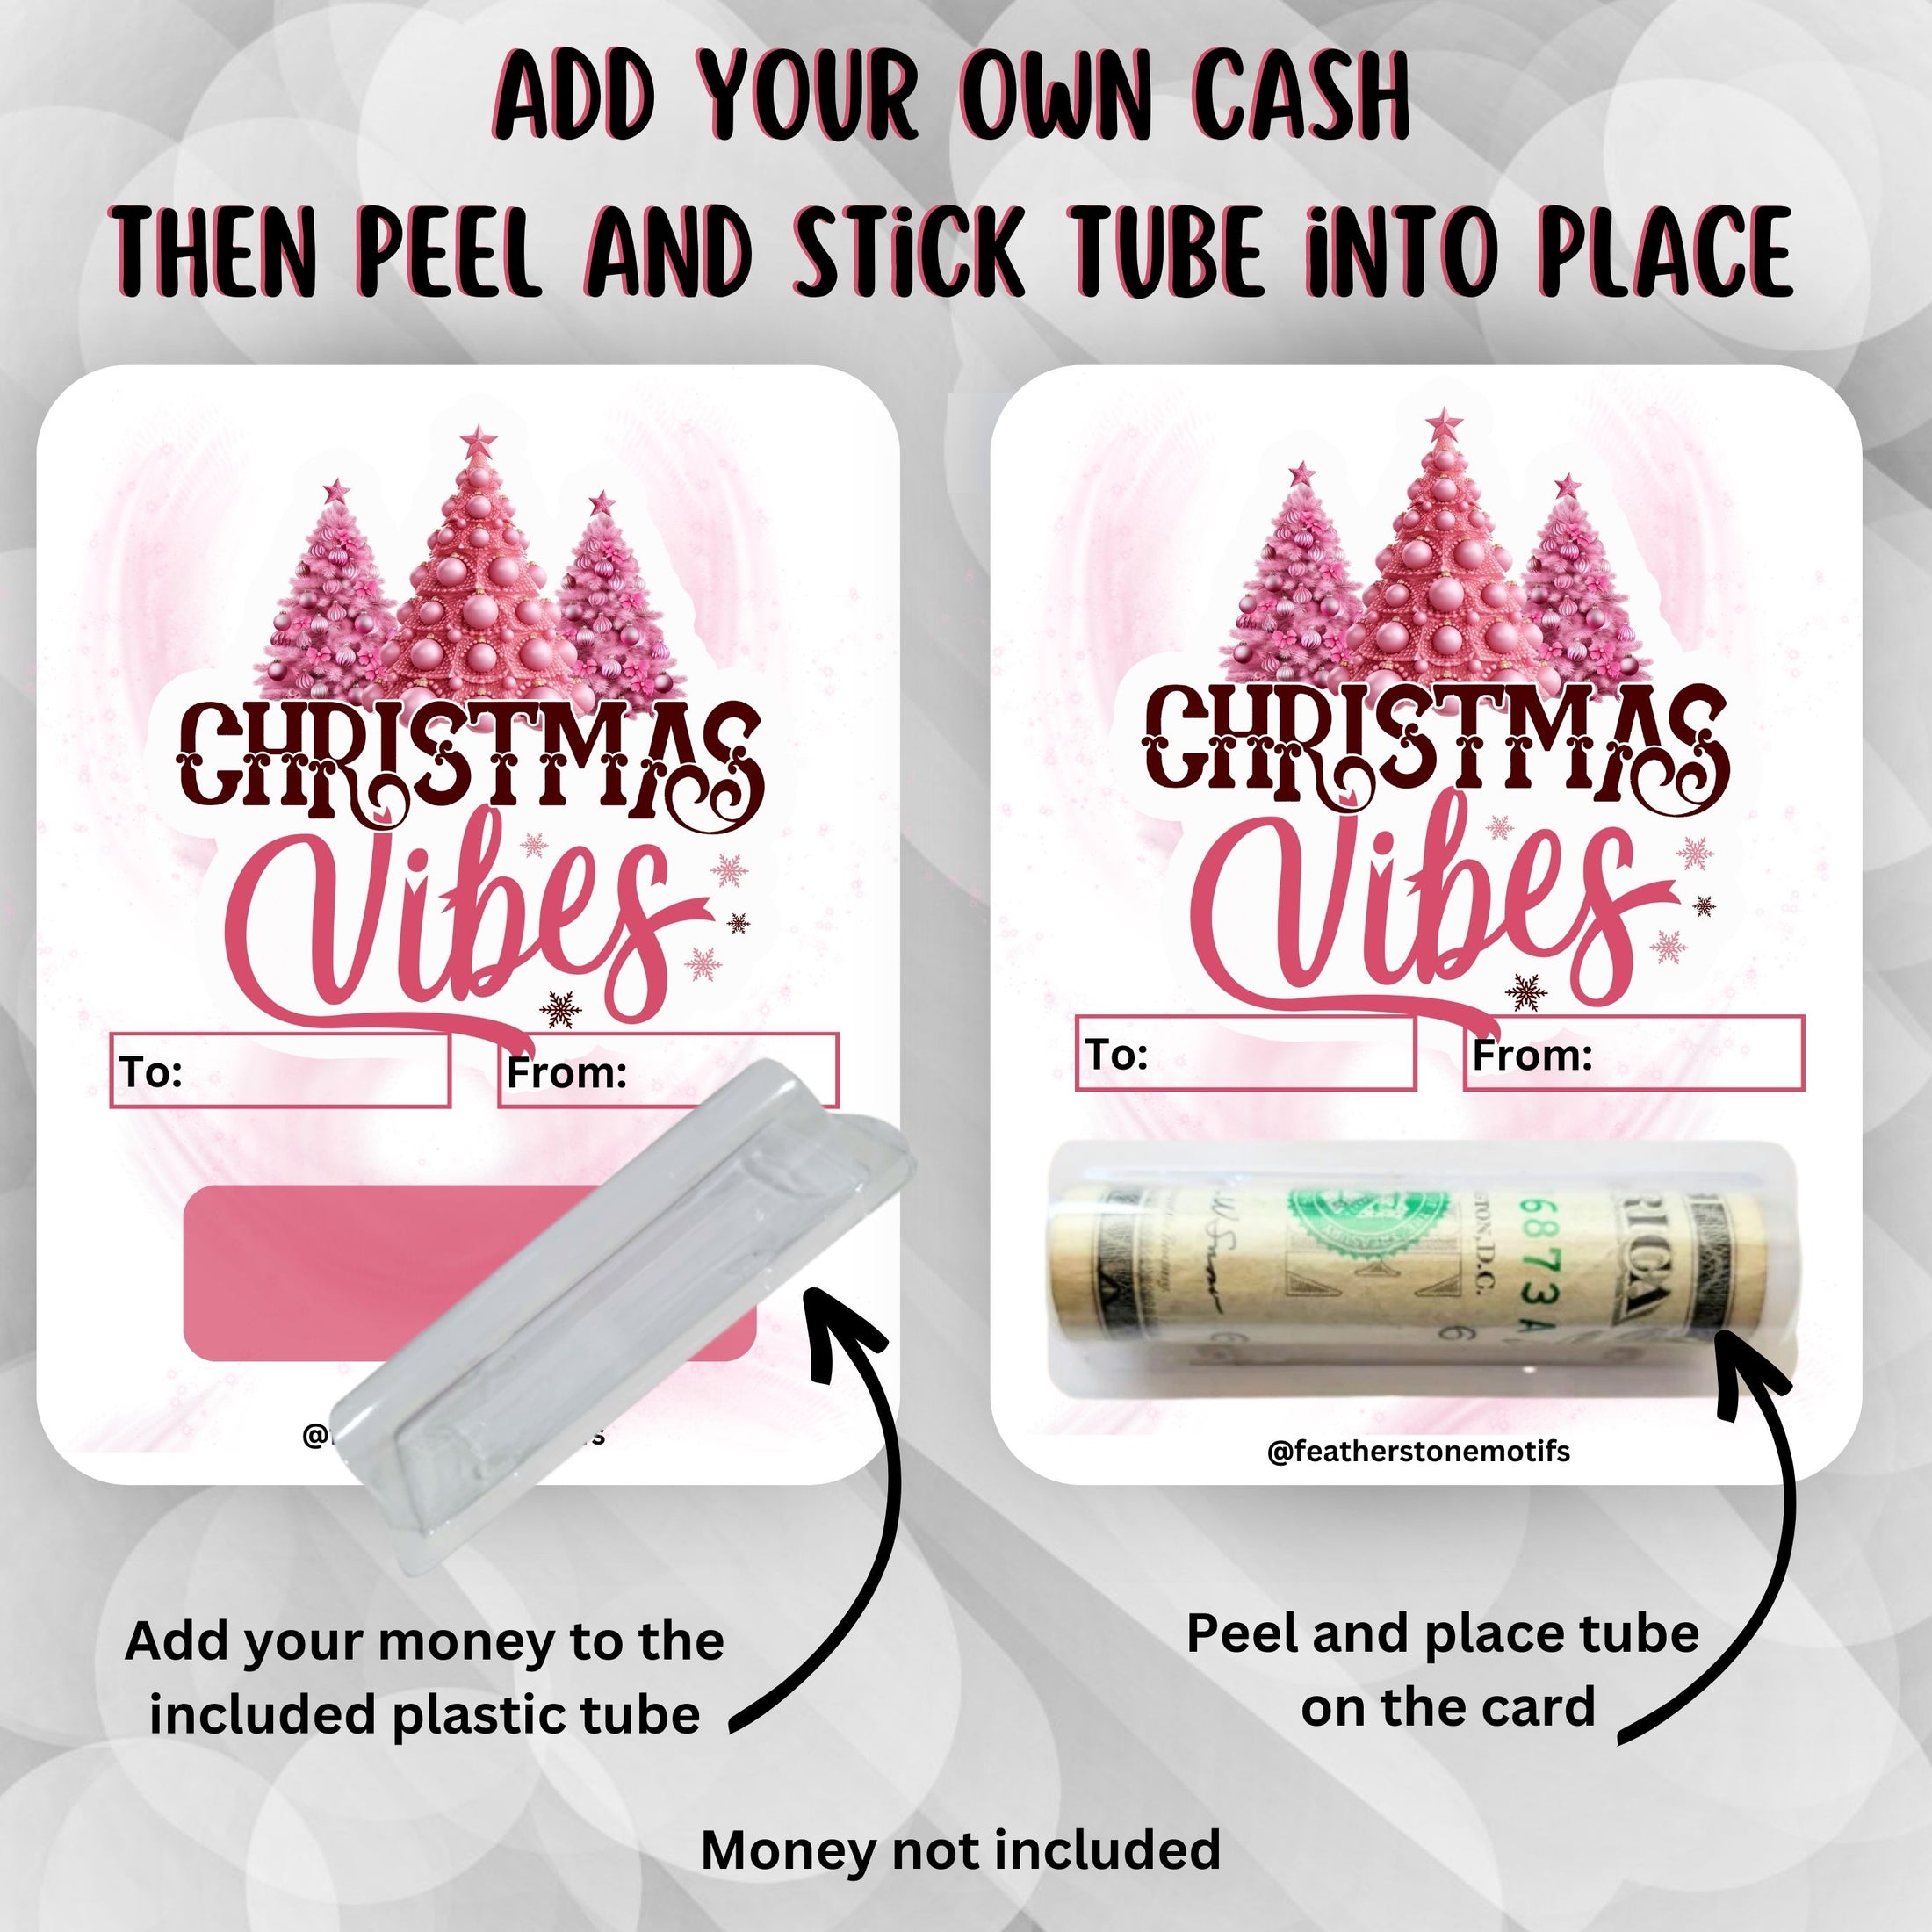 This image shows how to attach the money tube to the Christmas Vibes money card.